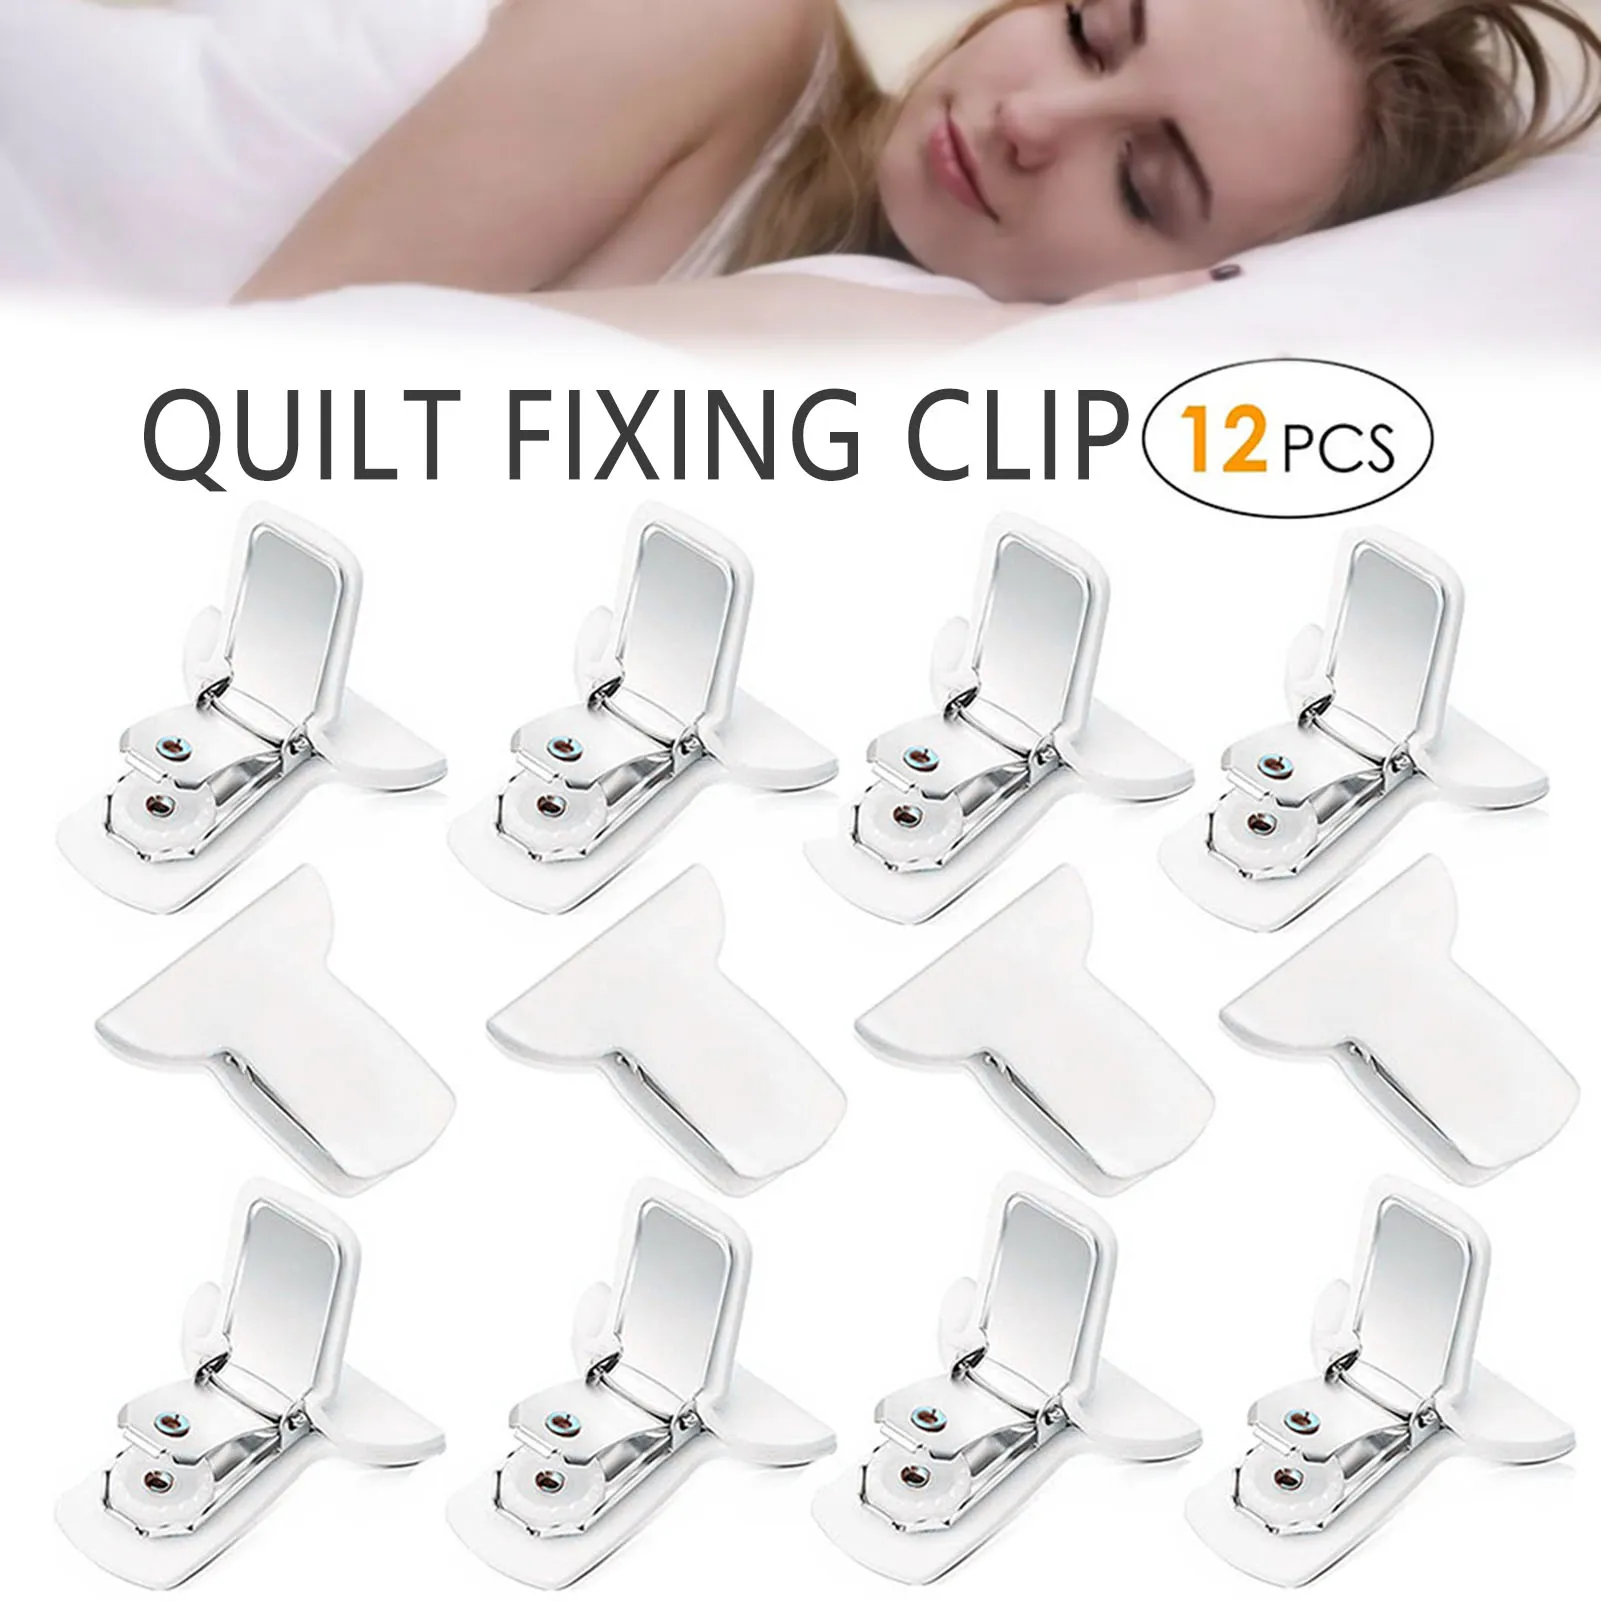 

Padded Comforter Clips Multipurpose Blanket Fasteners for Preventing Comforters From Shifting Inside Duvet Cover Clothes Pegs